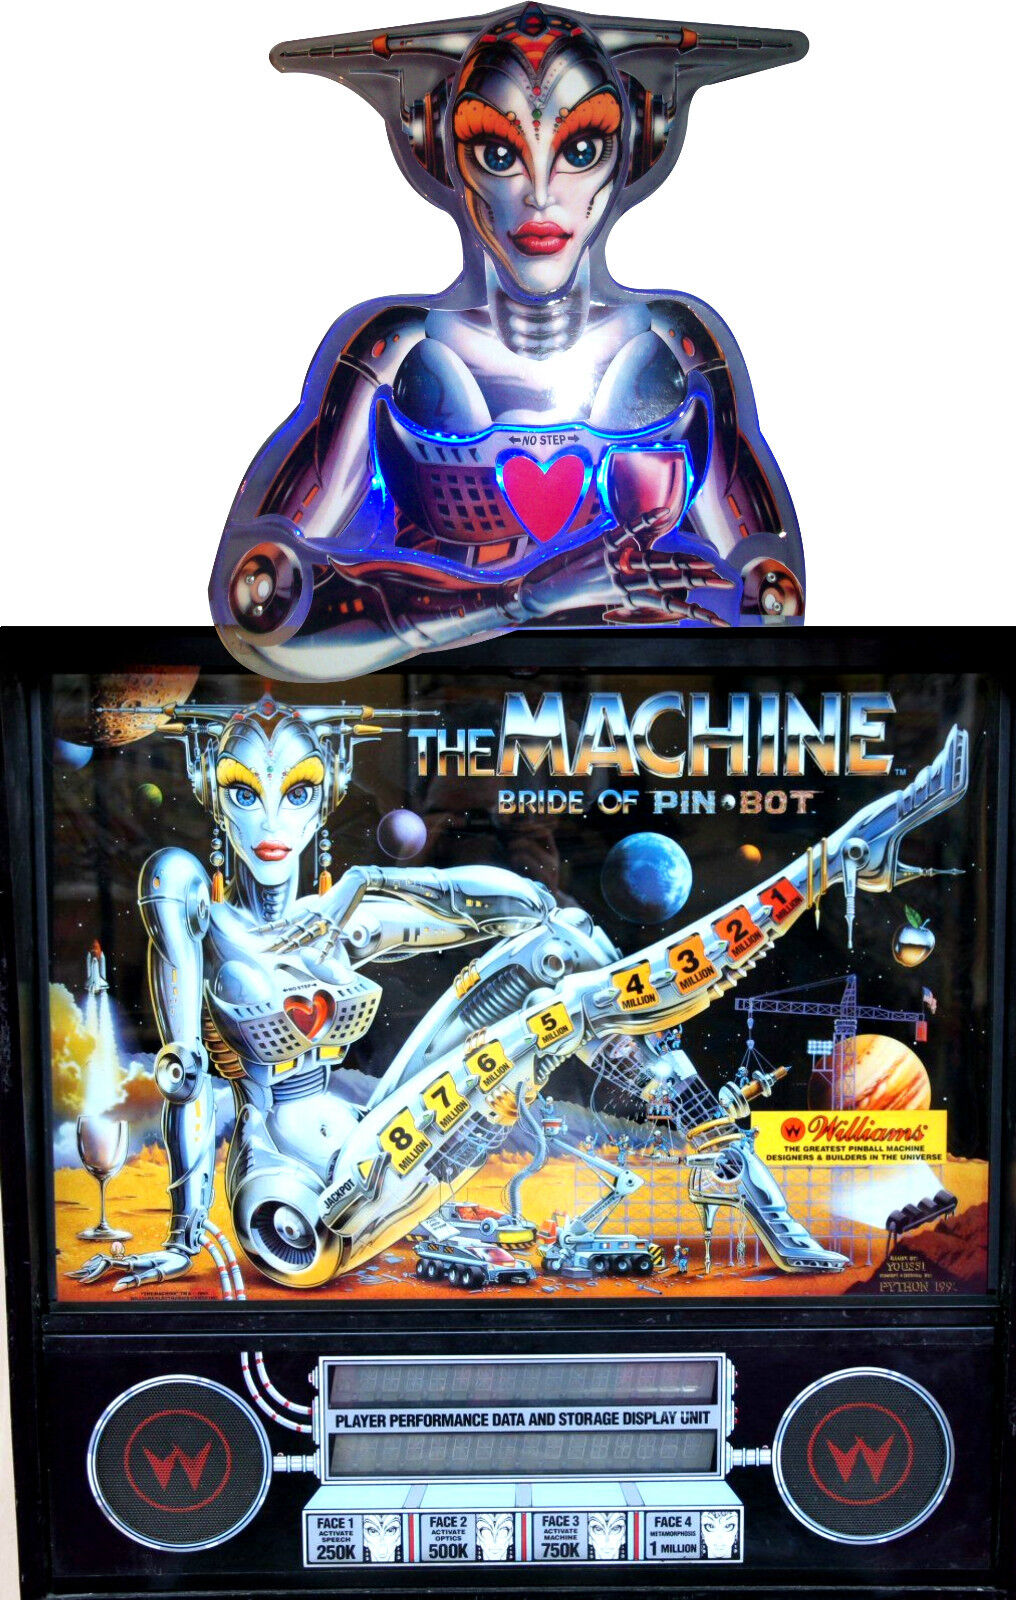 THE MACHINE BRIDE ON PINBOT JACK BOT AND PIN BOT TOPPER